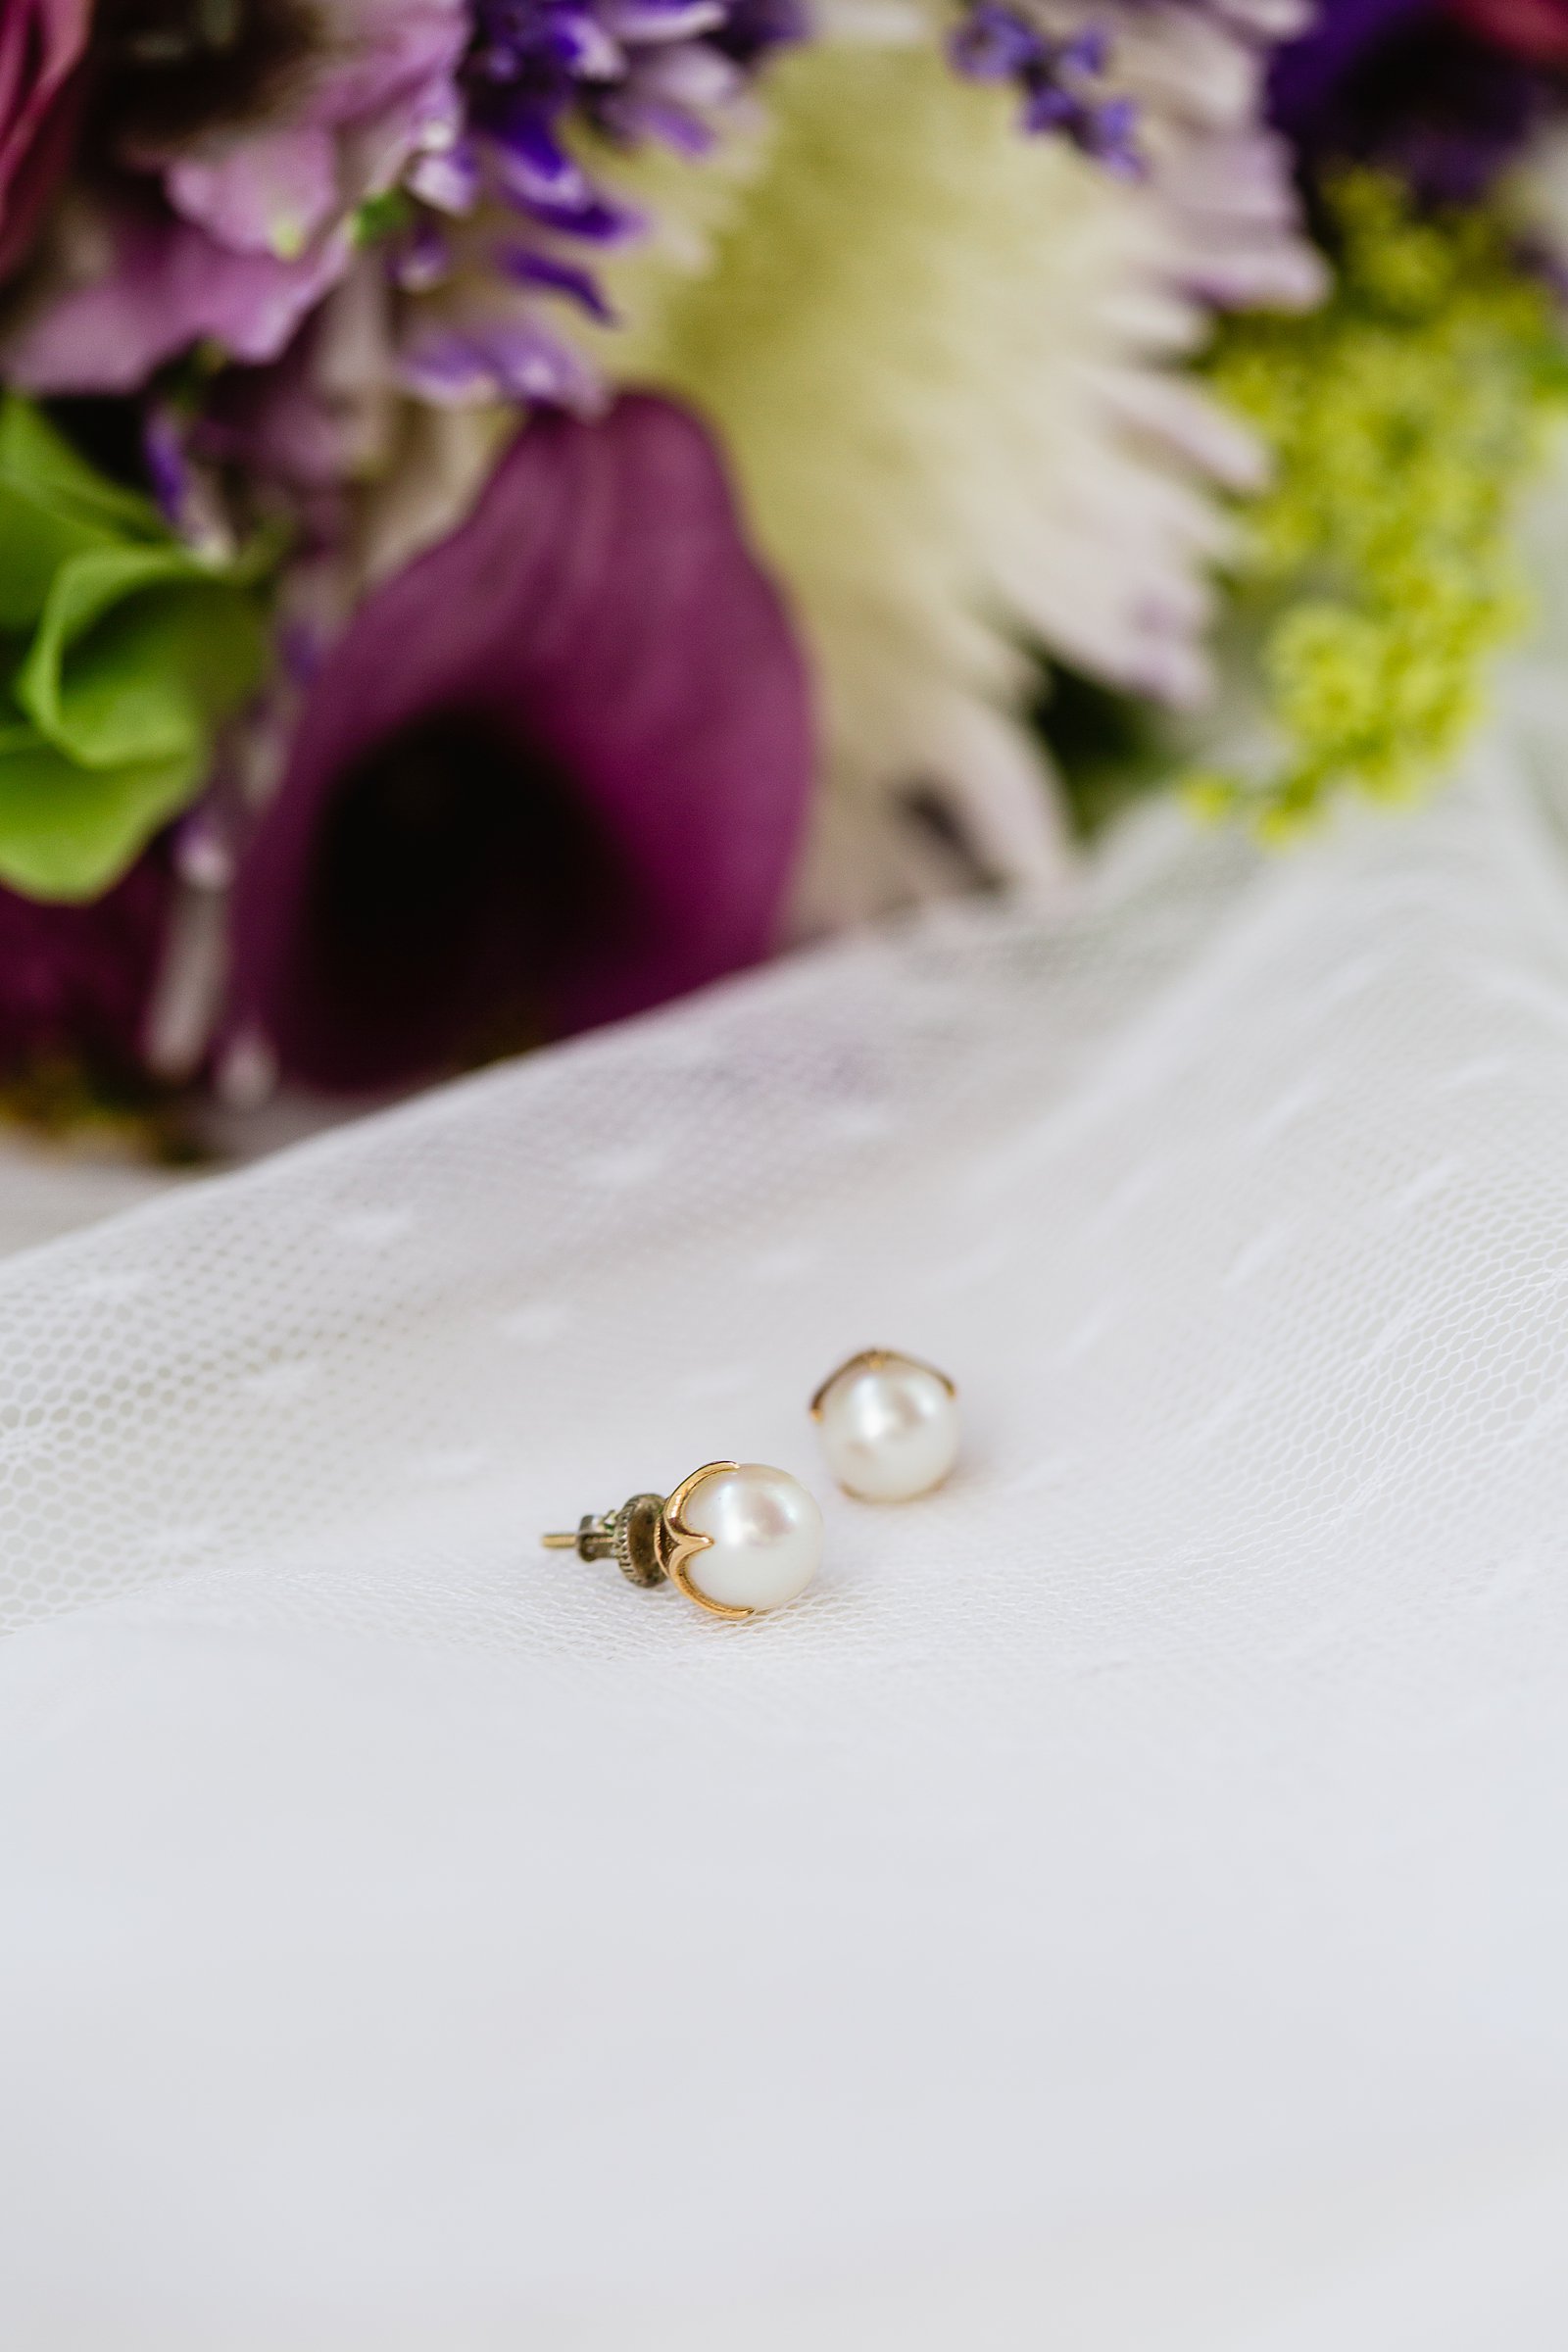 Brides's wedding day details of vintage pearl earrings by PMA Photography.